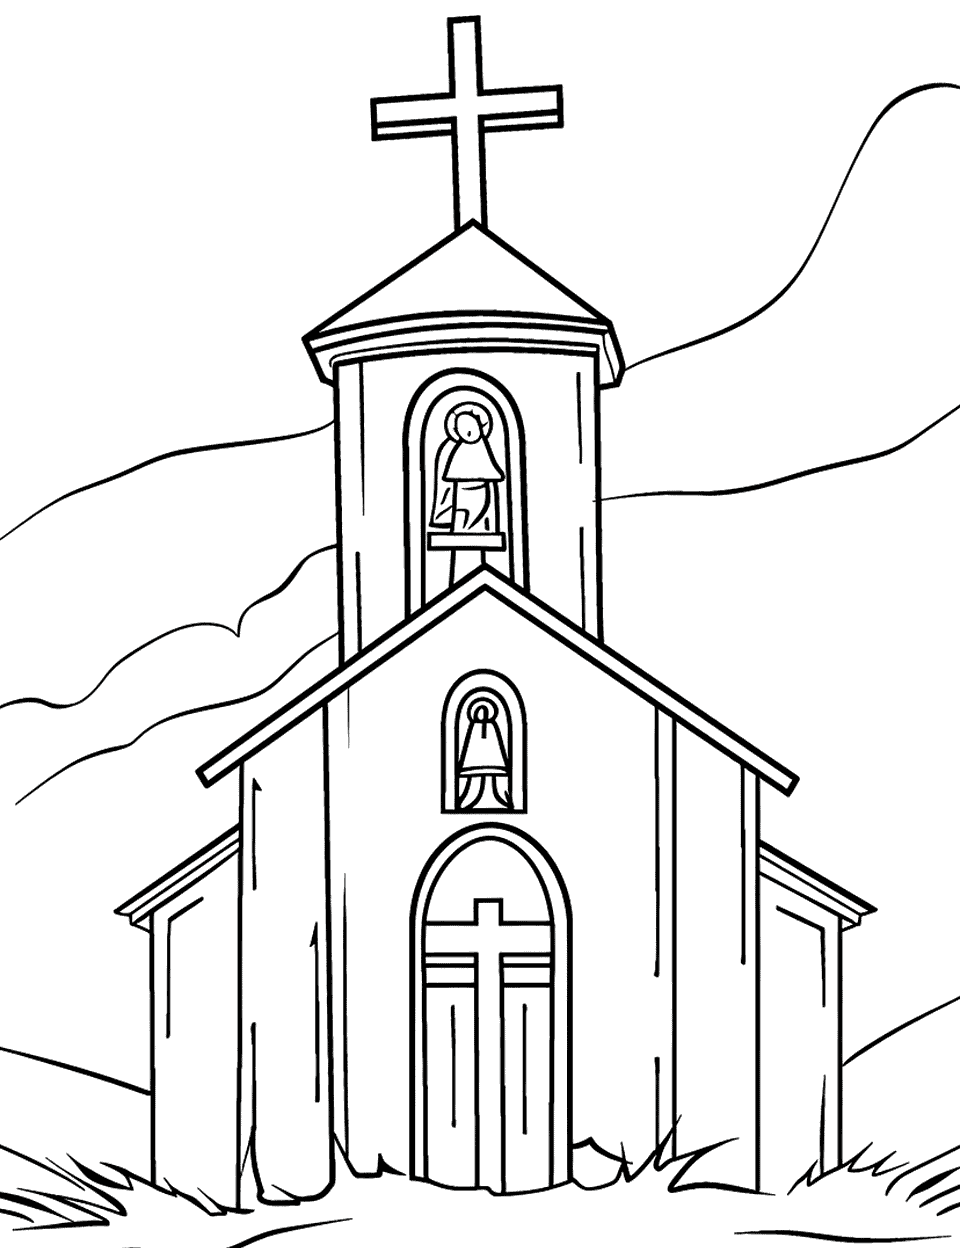 Simple Church Outline Cross Coloring Page - A church topped with a cross against mountain scenery.